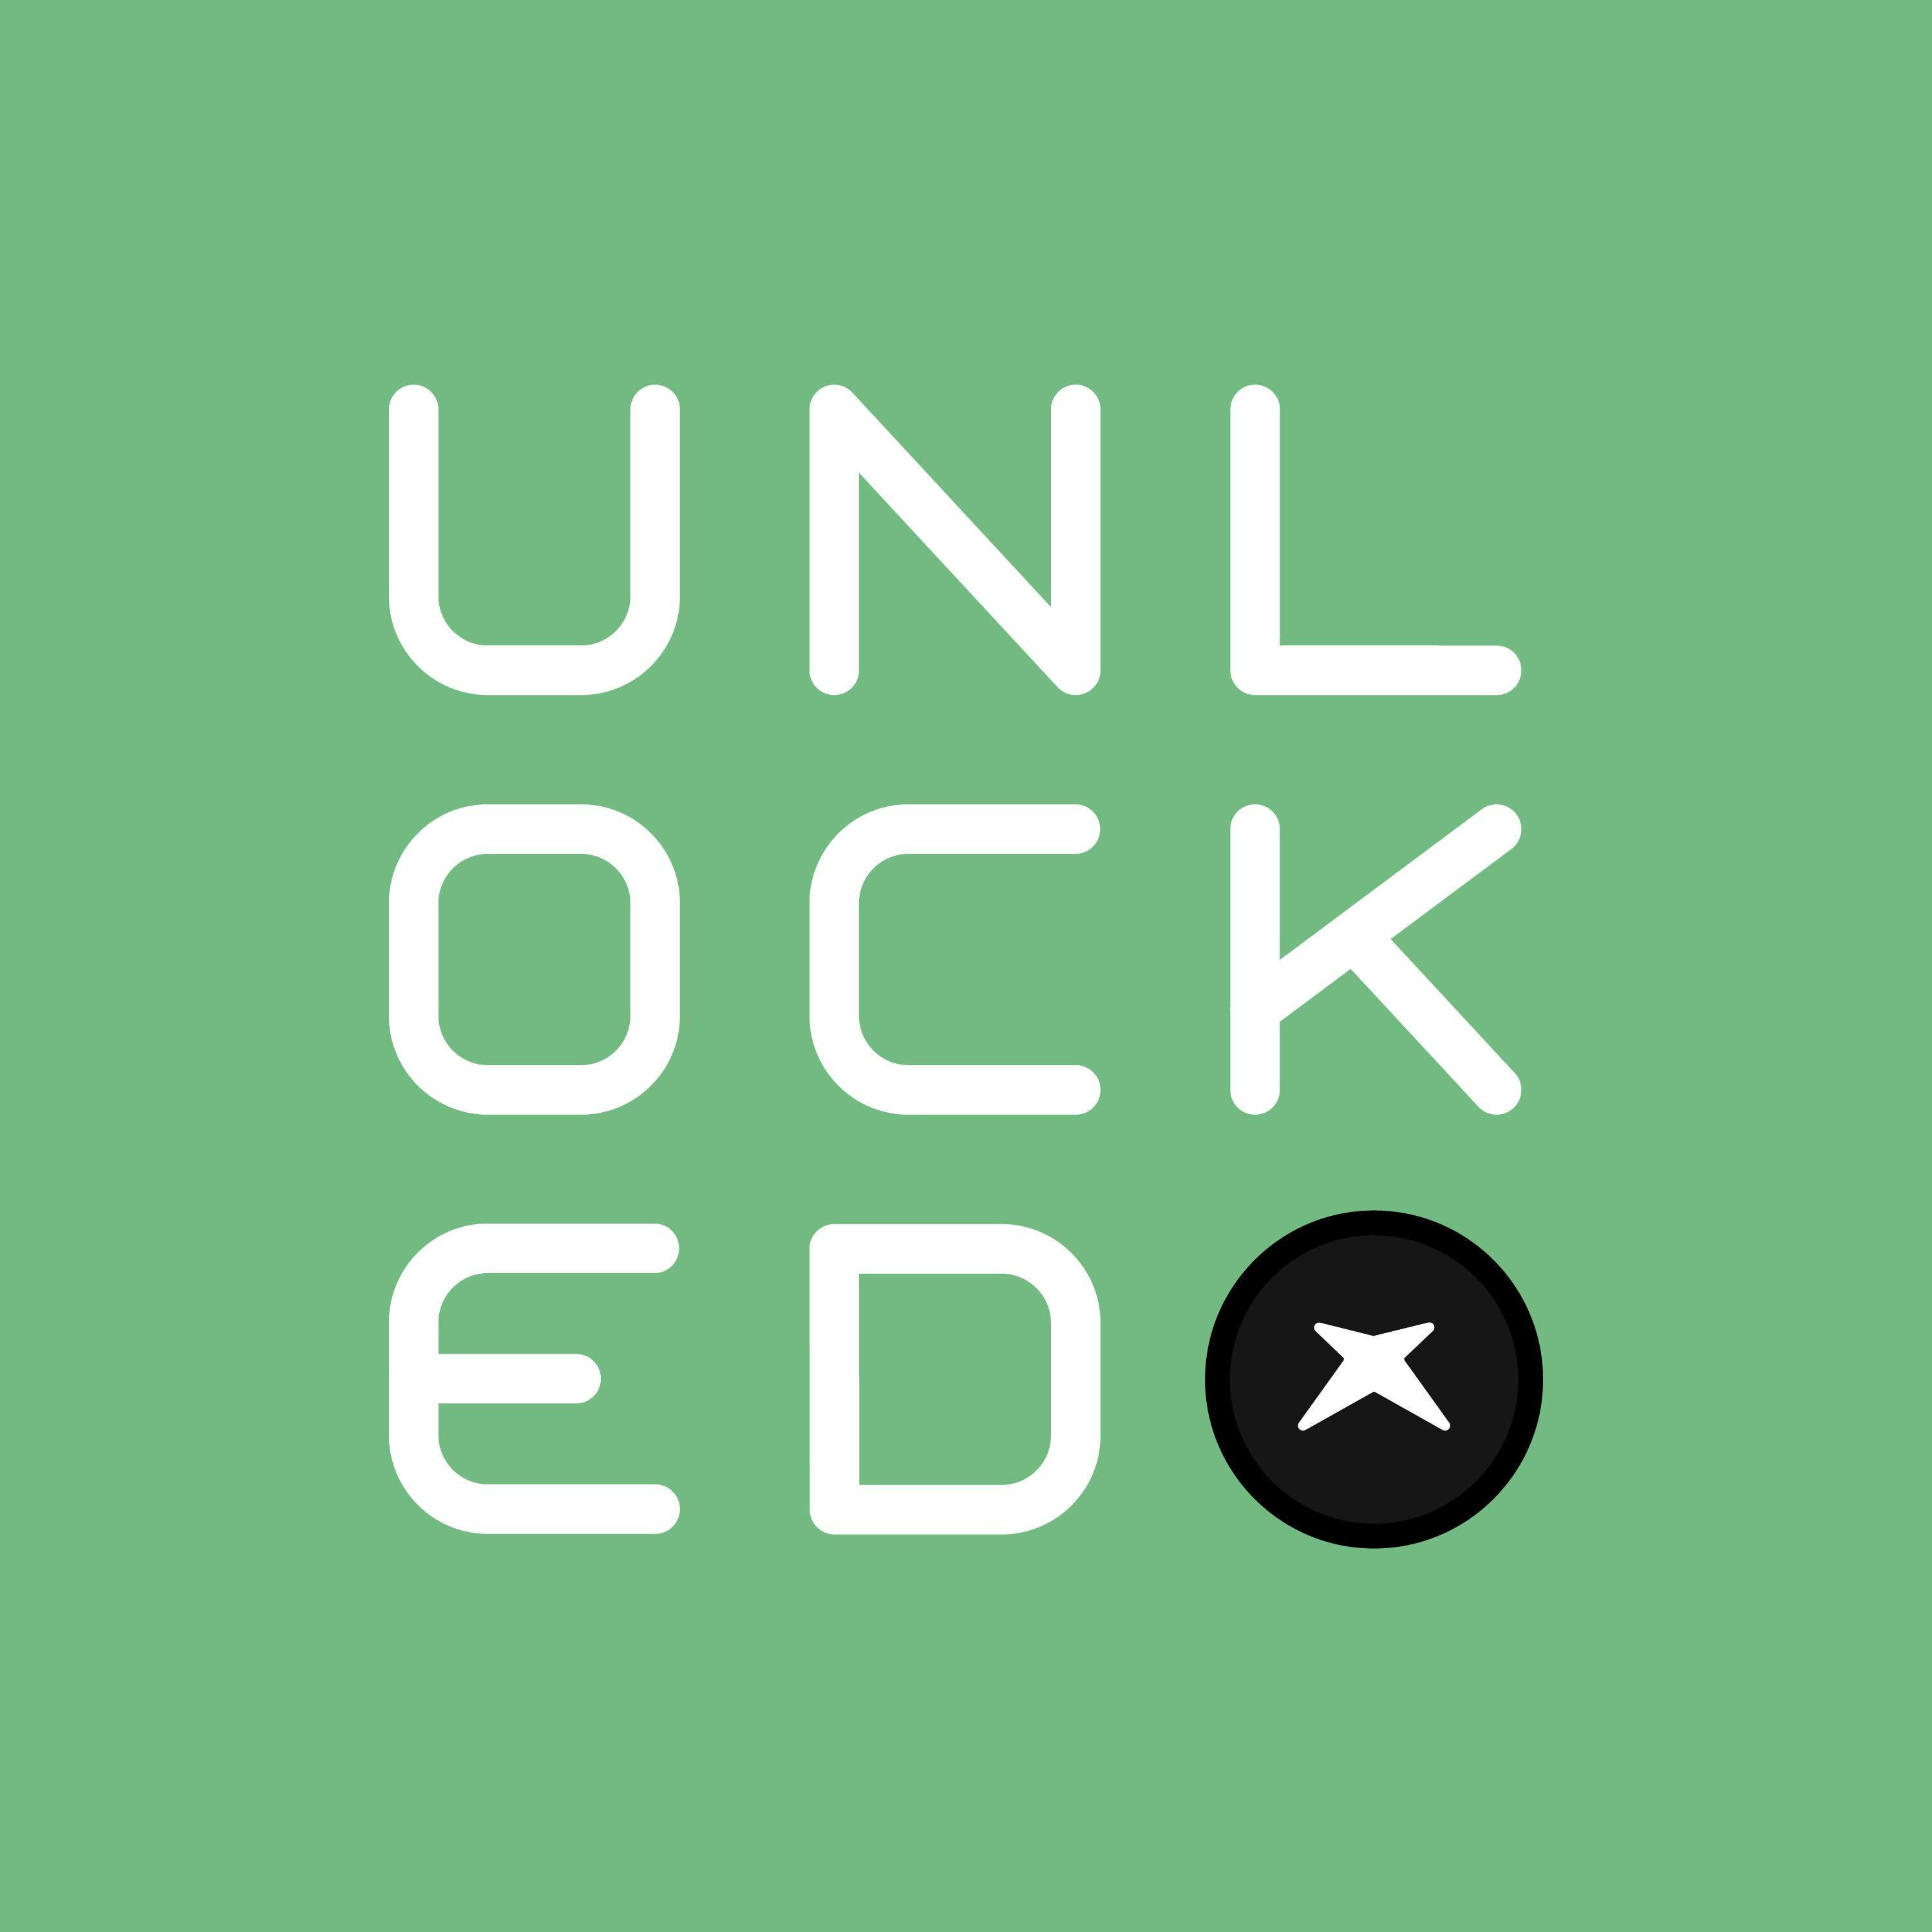 Podcast Unlocked Episode 158: About Tomb Raider's Exclusivity...